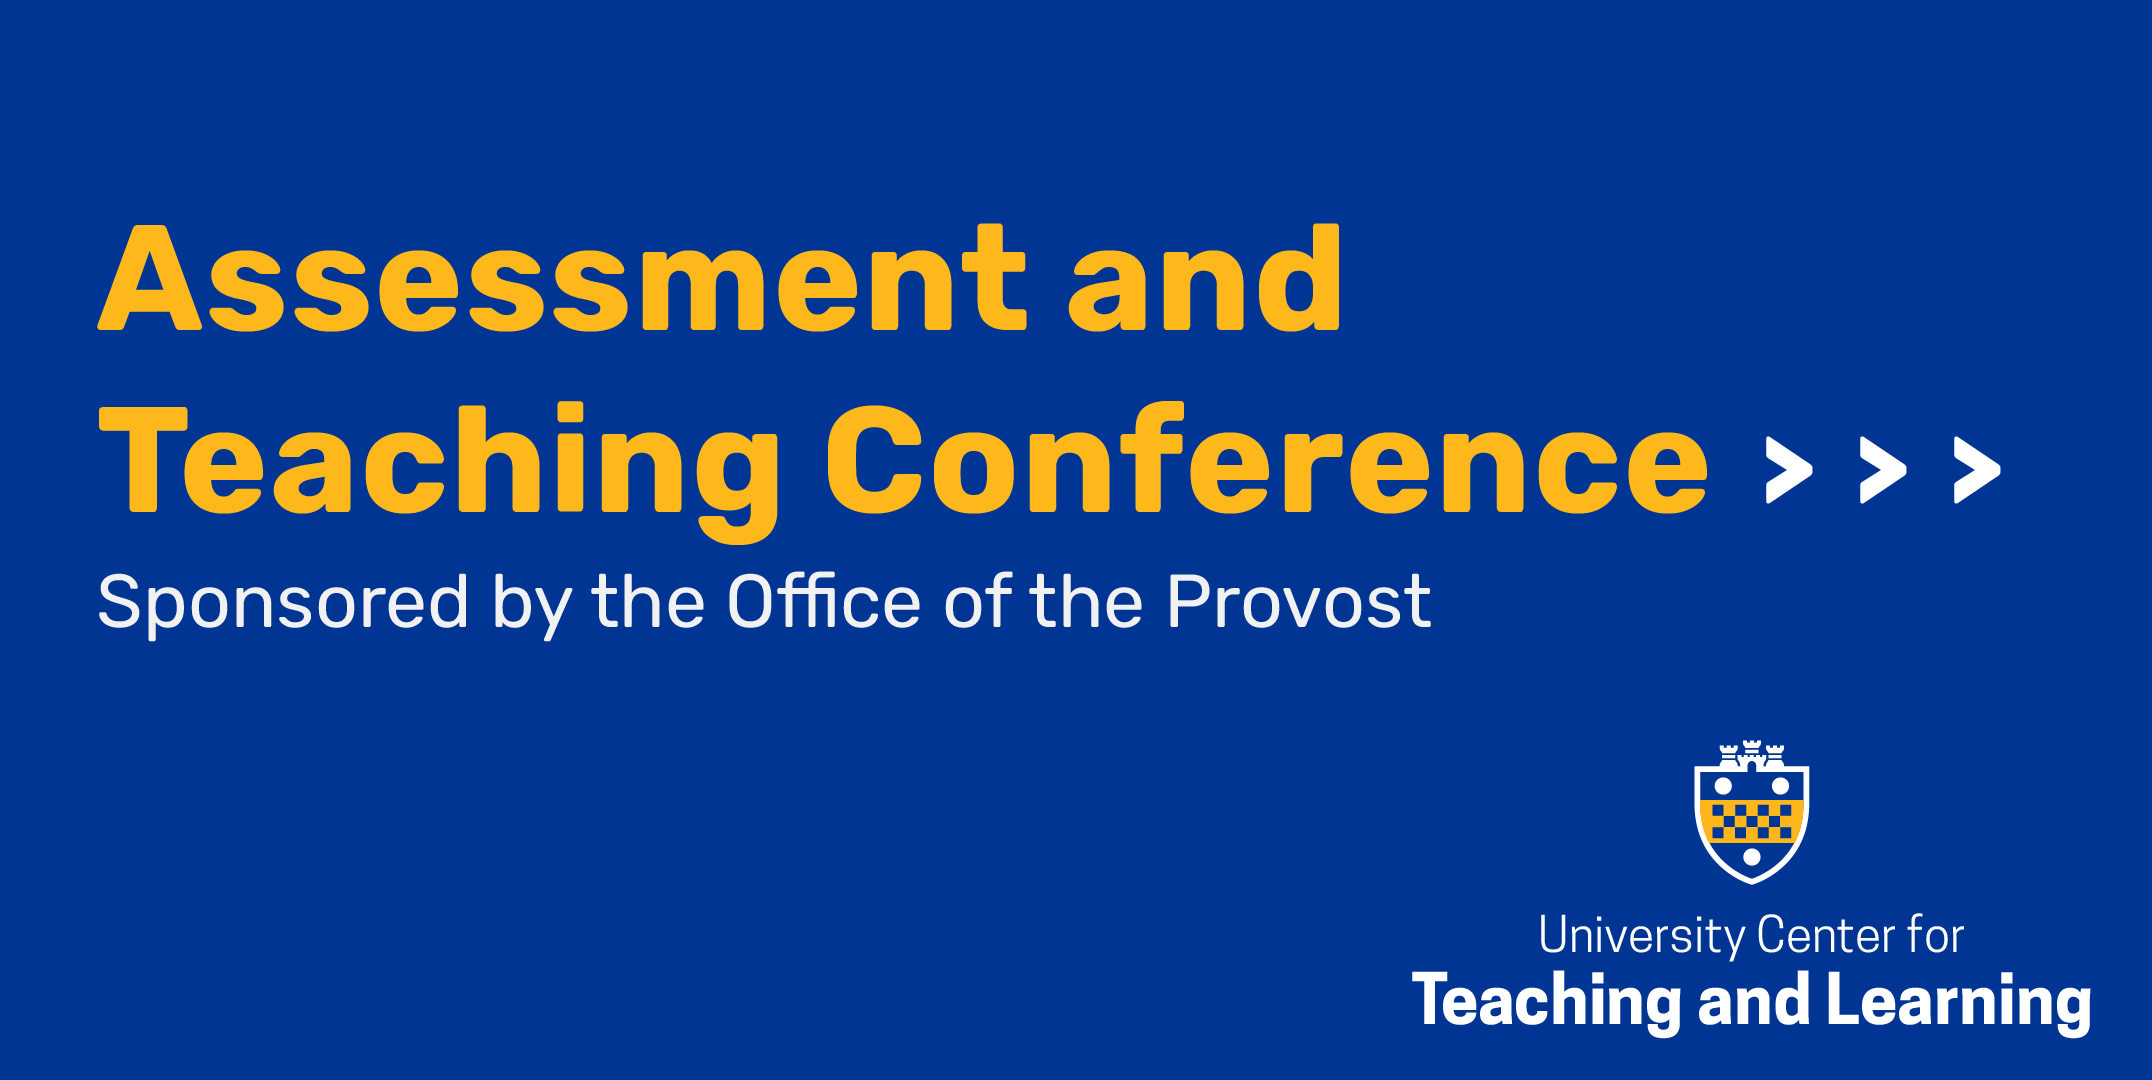 Assessment and Teaching Conference logo